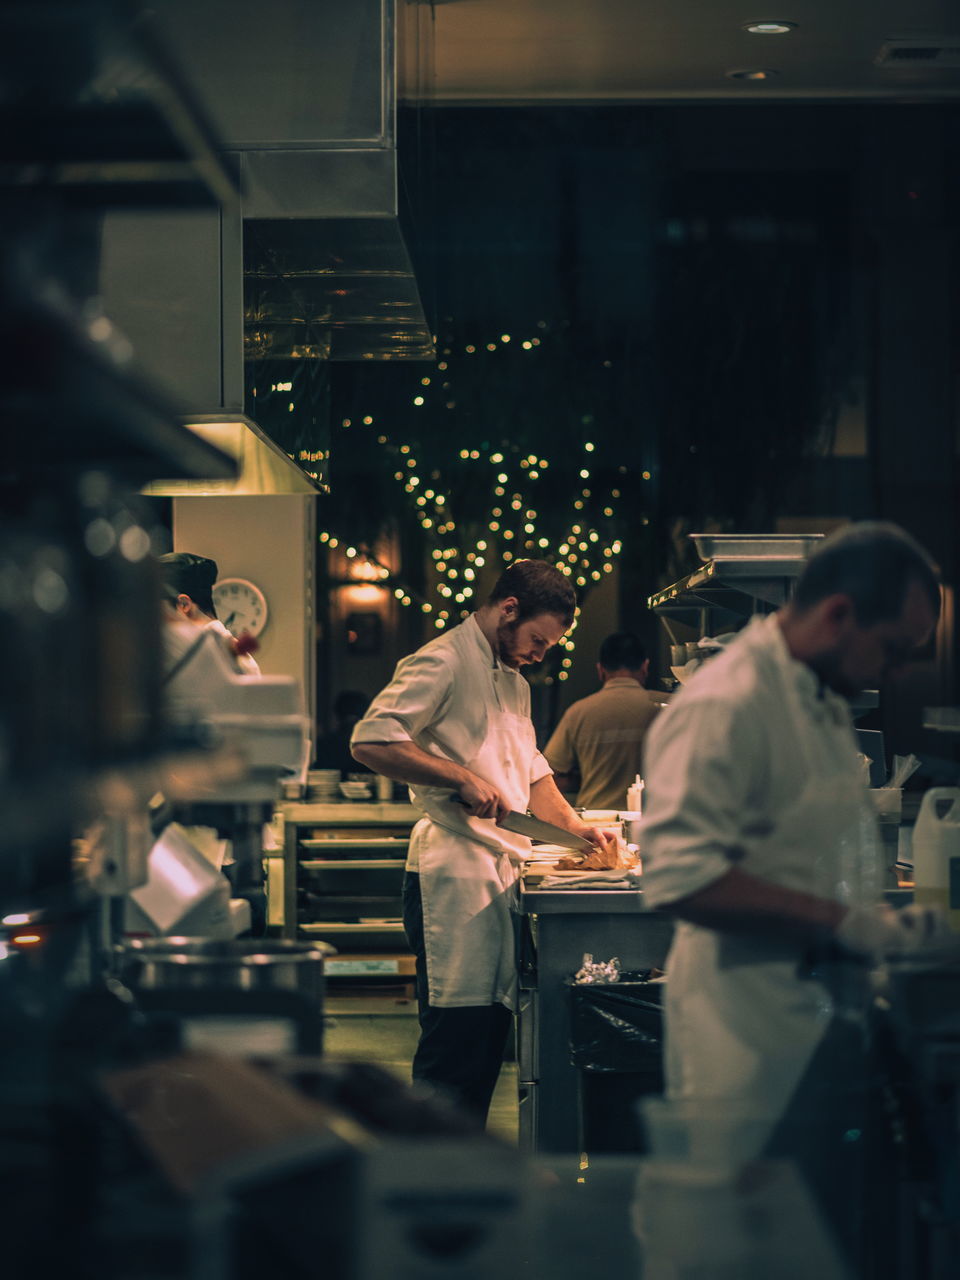 real people, mid adult men, restaurant, indoors, standing, food and drink industry, men, coworker, uniform, young adult, occupation, two people, togetherness, night, bartender, illuminated, food and drink establishment, young women, commercial kitchen, working, teamwork, adult, people